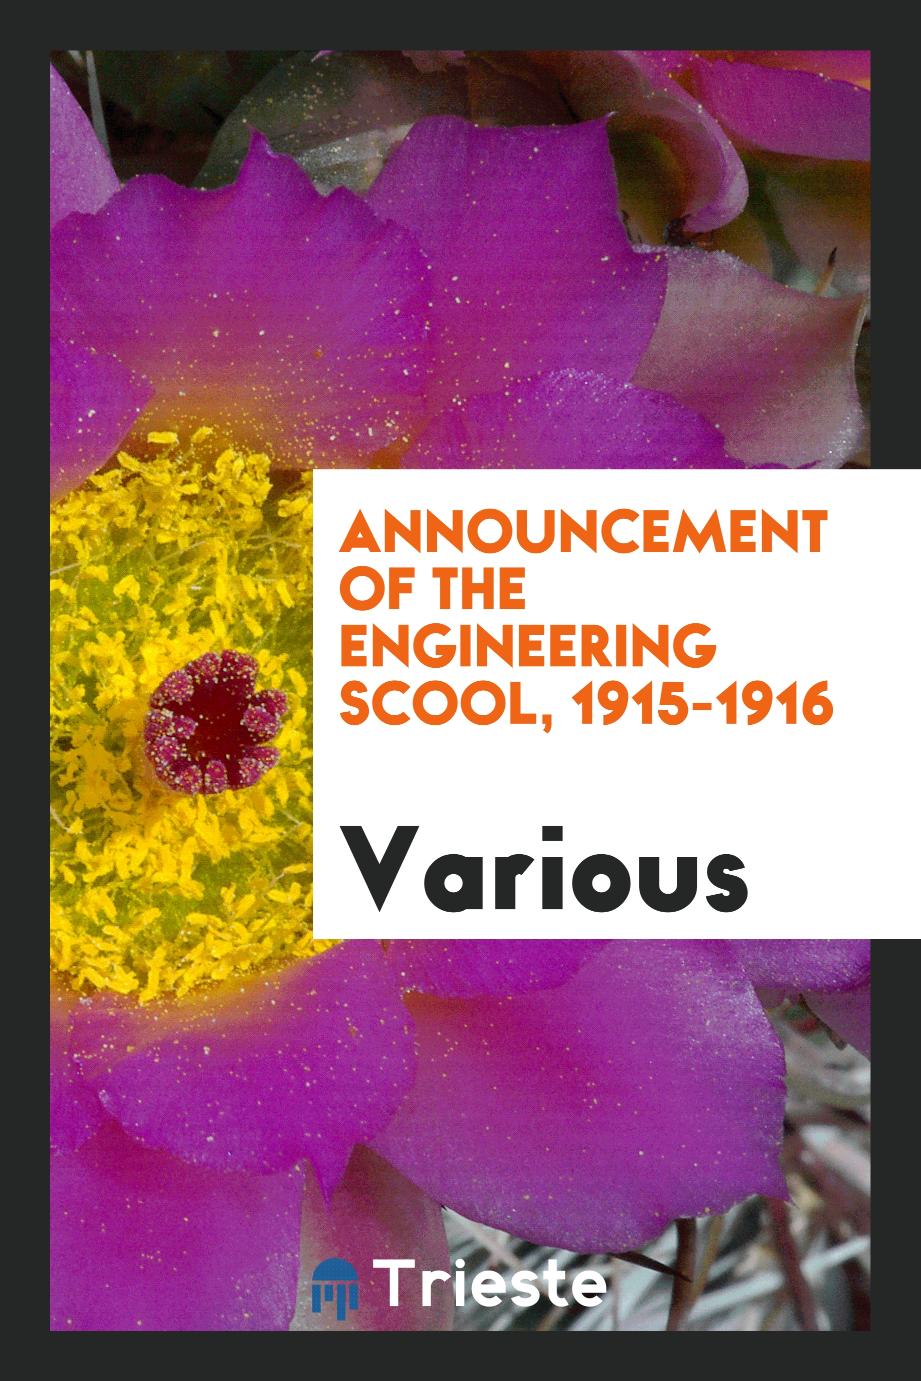 Announcement of the Engineering Scool, 1915-1916